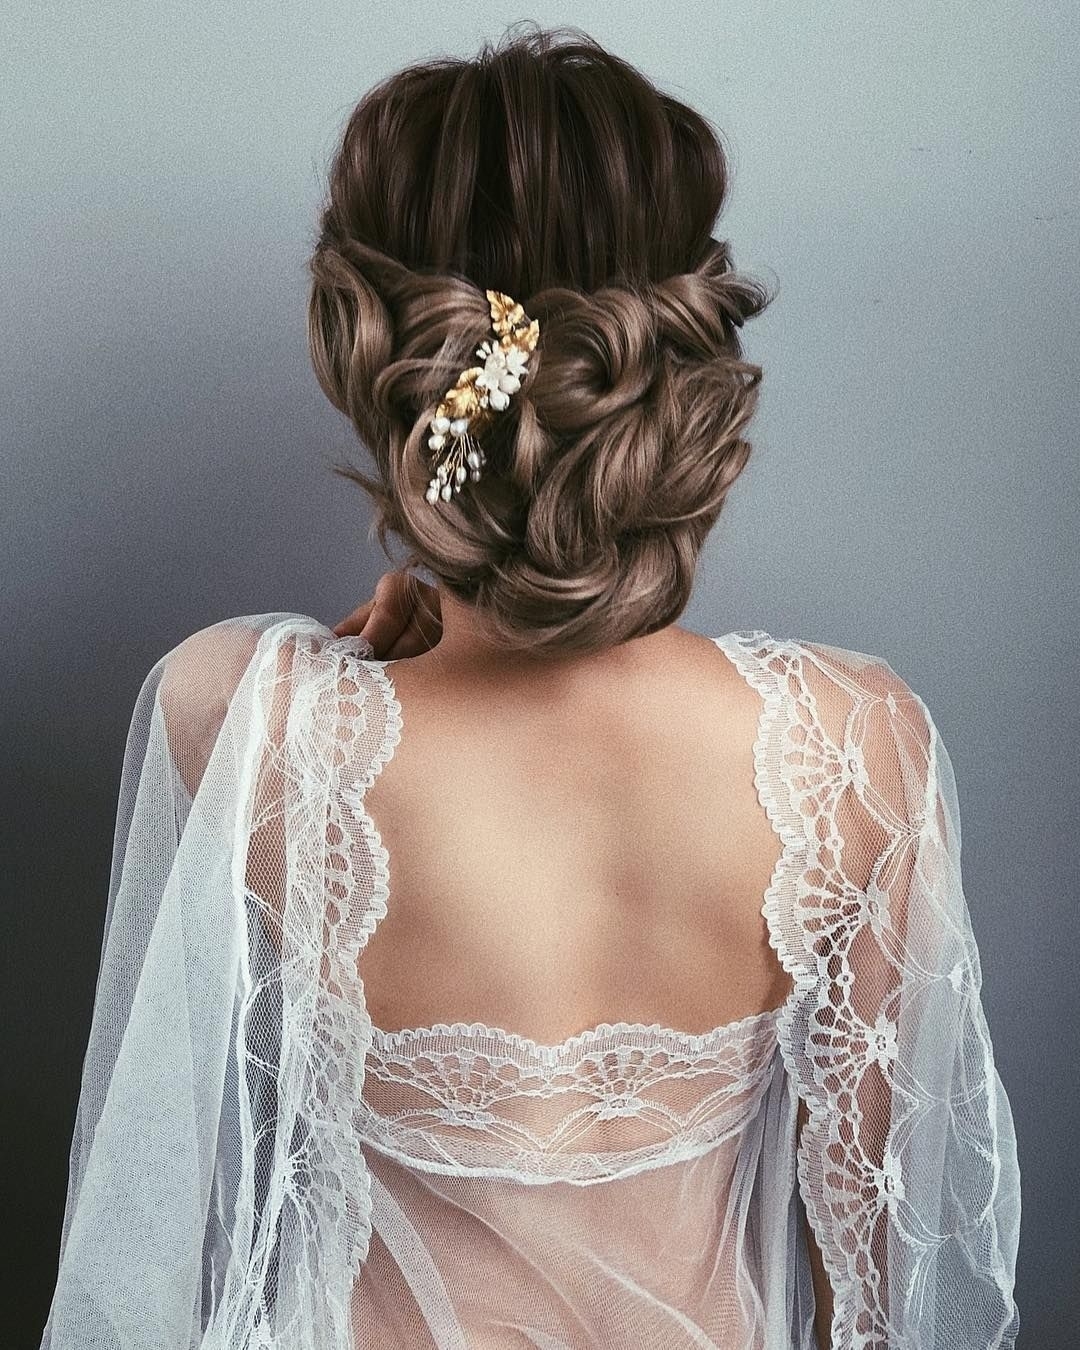 87 Fabulous Wedding Hairstyles For Every Wedding Dress with Wedding Hair For Sweetheart Neckline